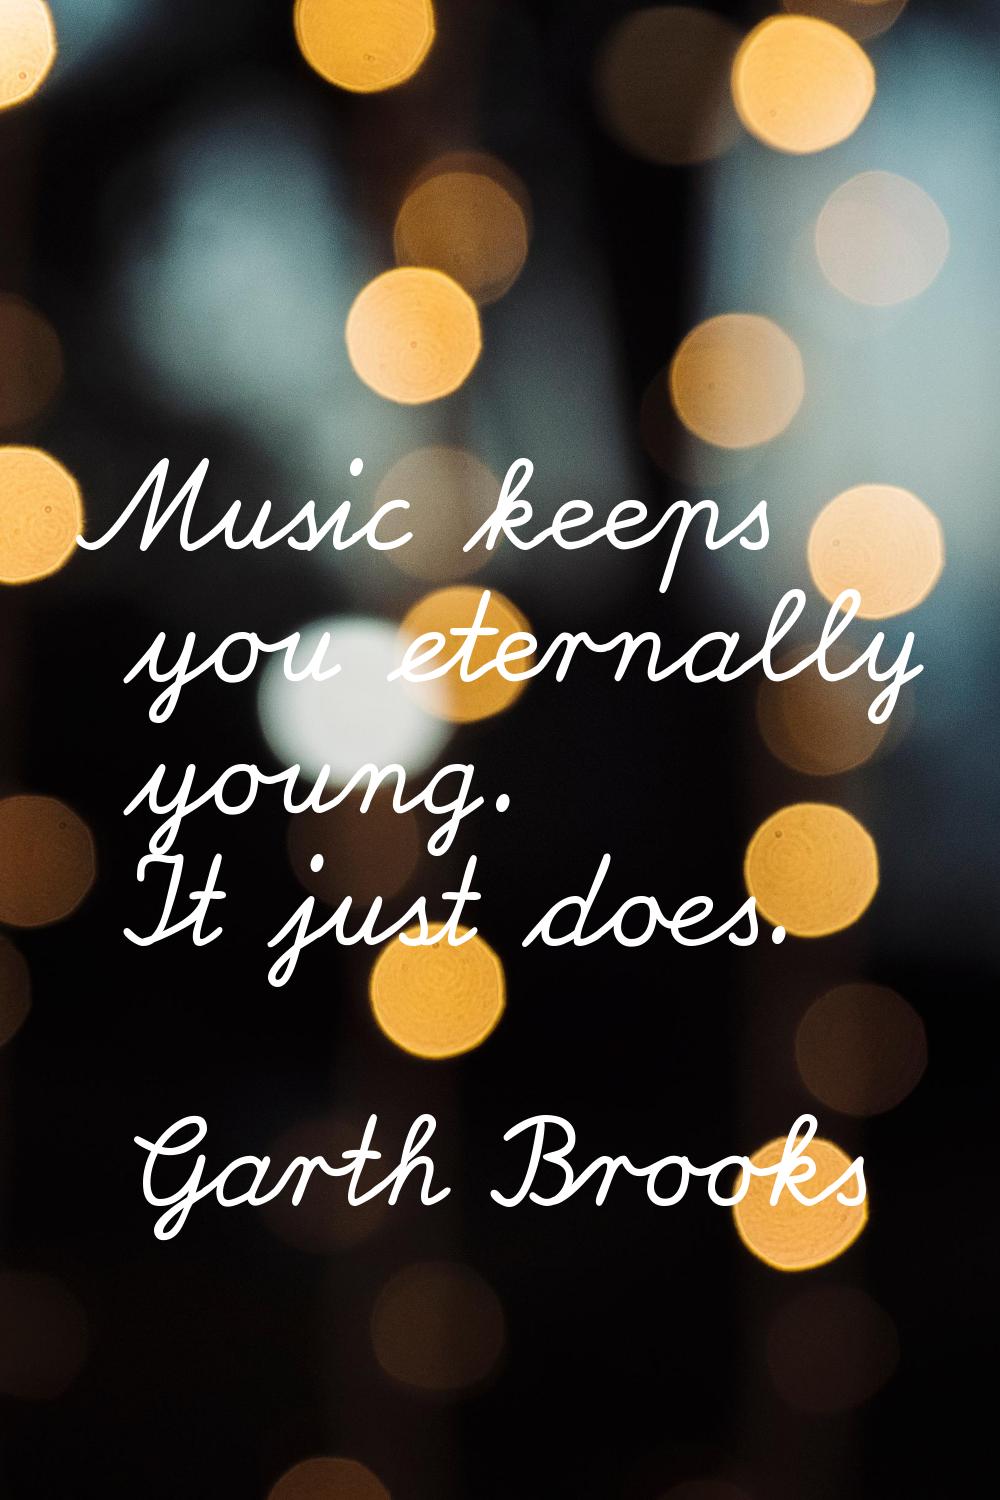 Music keeps you eternally young. It just does.